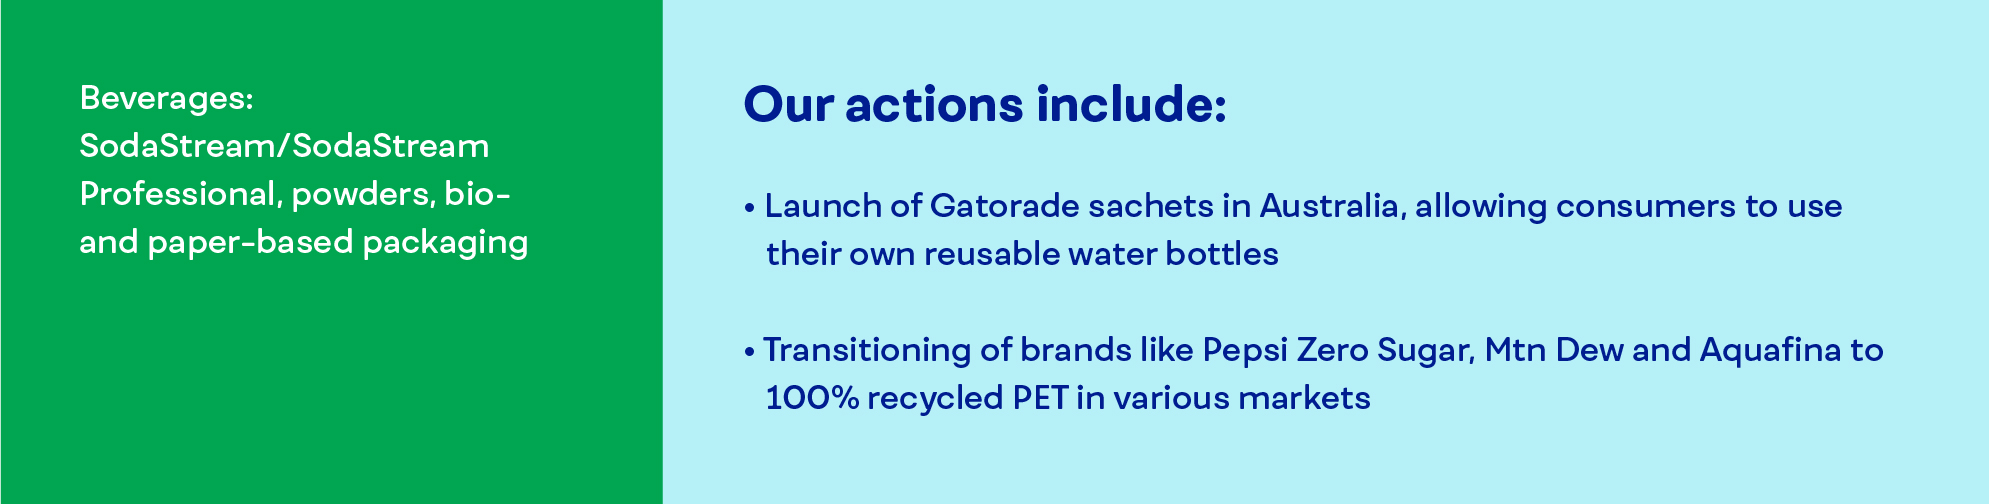 Launch of Gatorade sachets in Australia, allowing consumers to use their own reusable water bottles. Transitioning of brands like Pepsi Zero Sugar, Mtn Dew and Aquafina to 100% recycled PET in various markets.